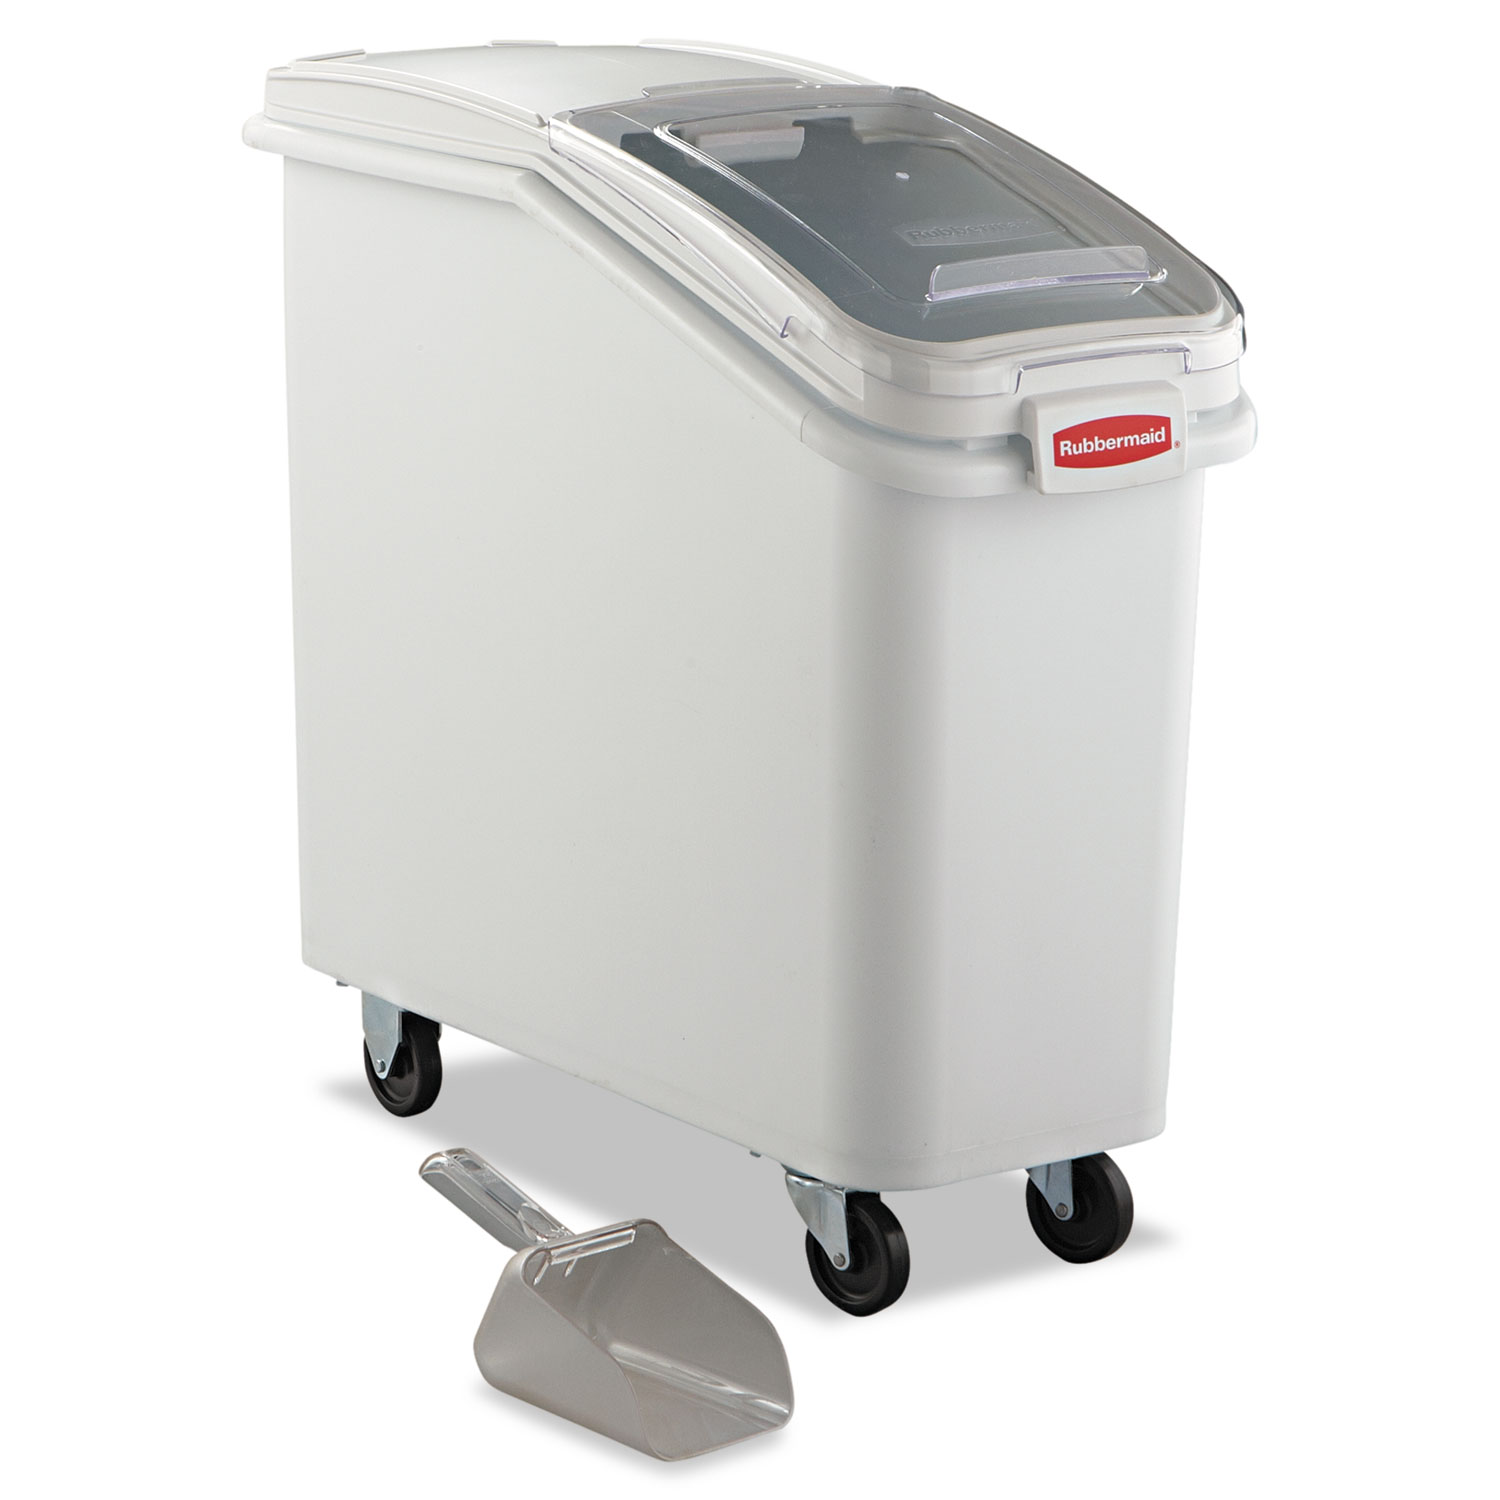  Rubbermaid Commercial FG360088WHT ProSave Mobile Ingredient Bin, 20.57gal, 13 1/8w x 29 1/4d x 28h, White (RCP360088WHI) 